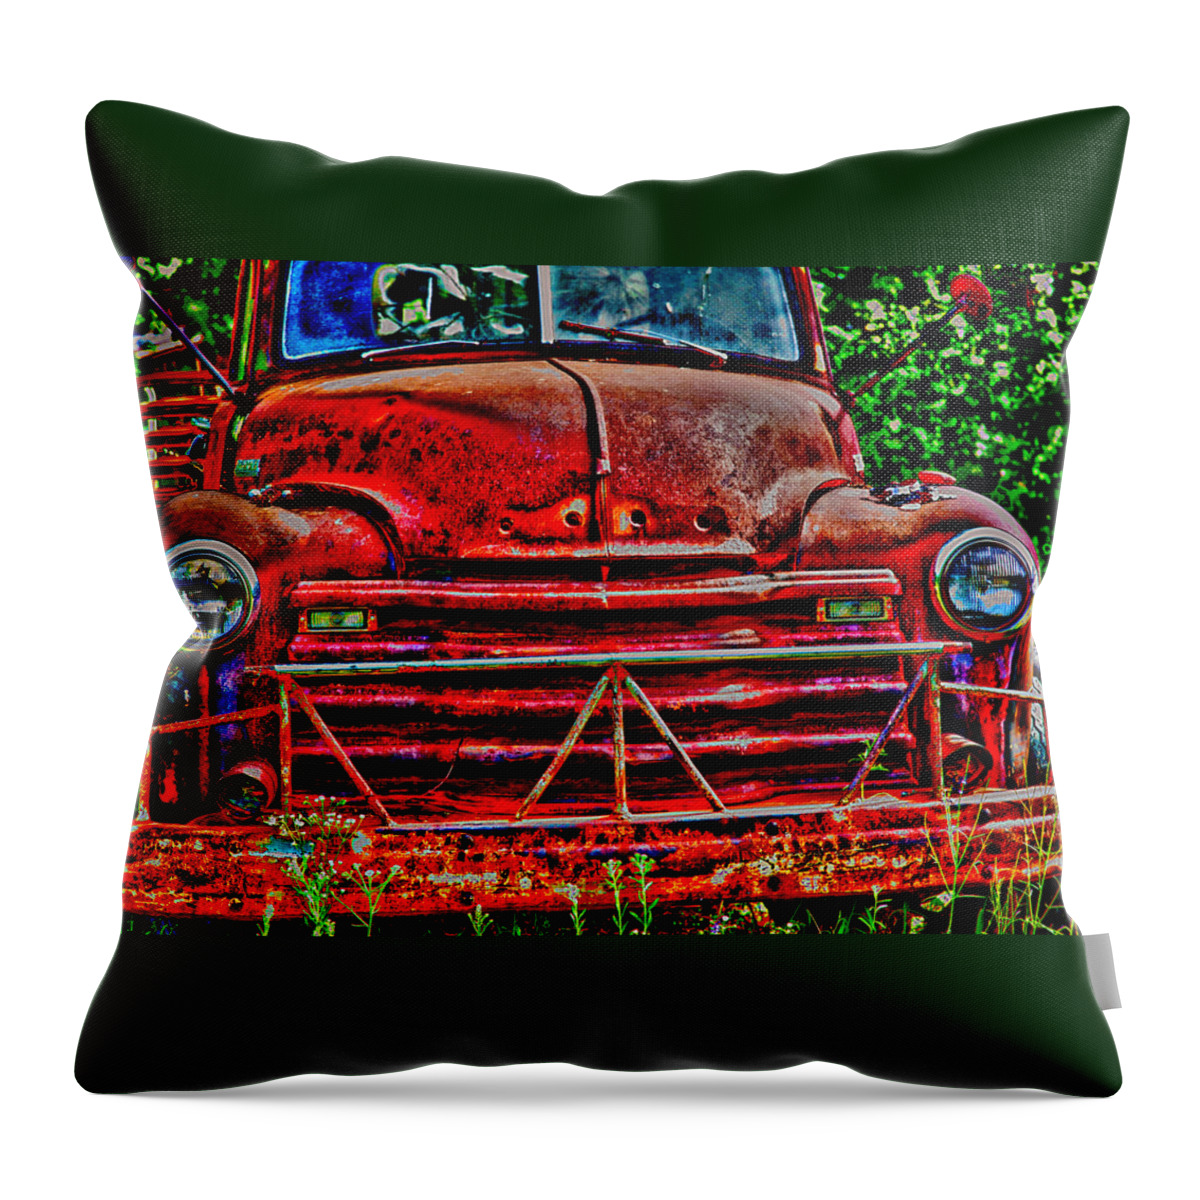 Truck Throw Pillow featuring the photograph Big Red by Toni Hopper